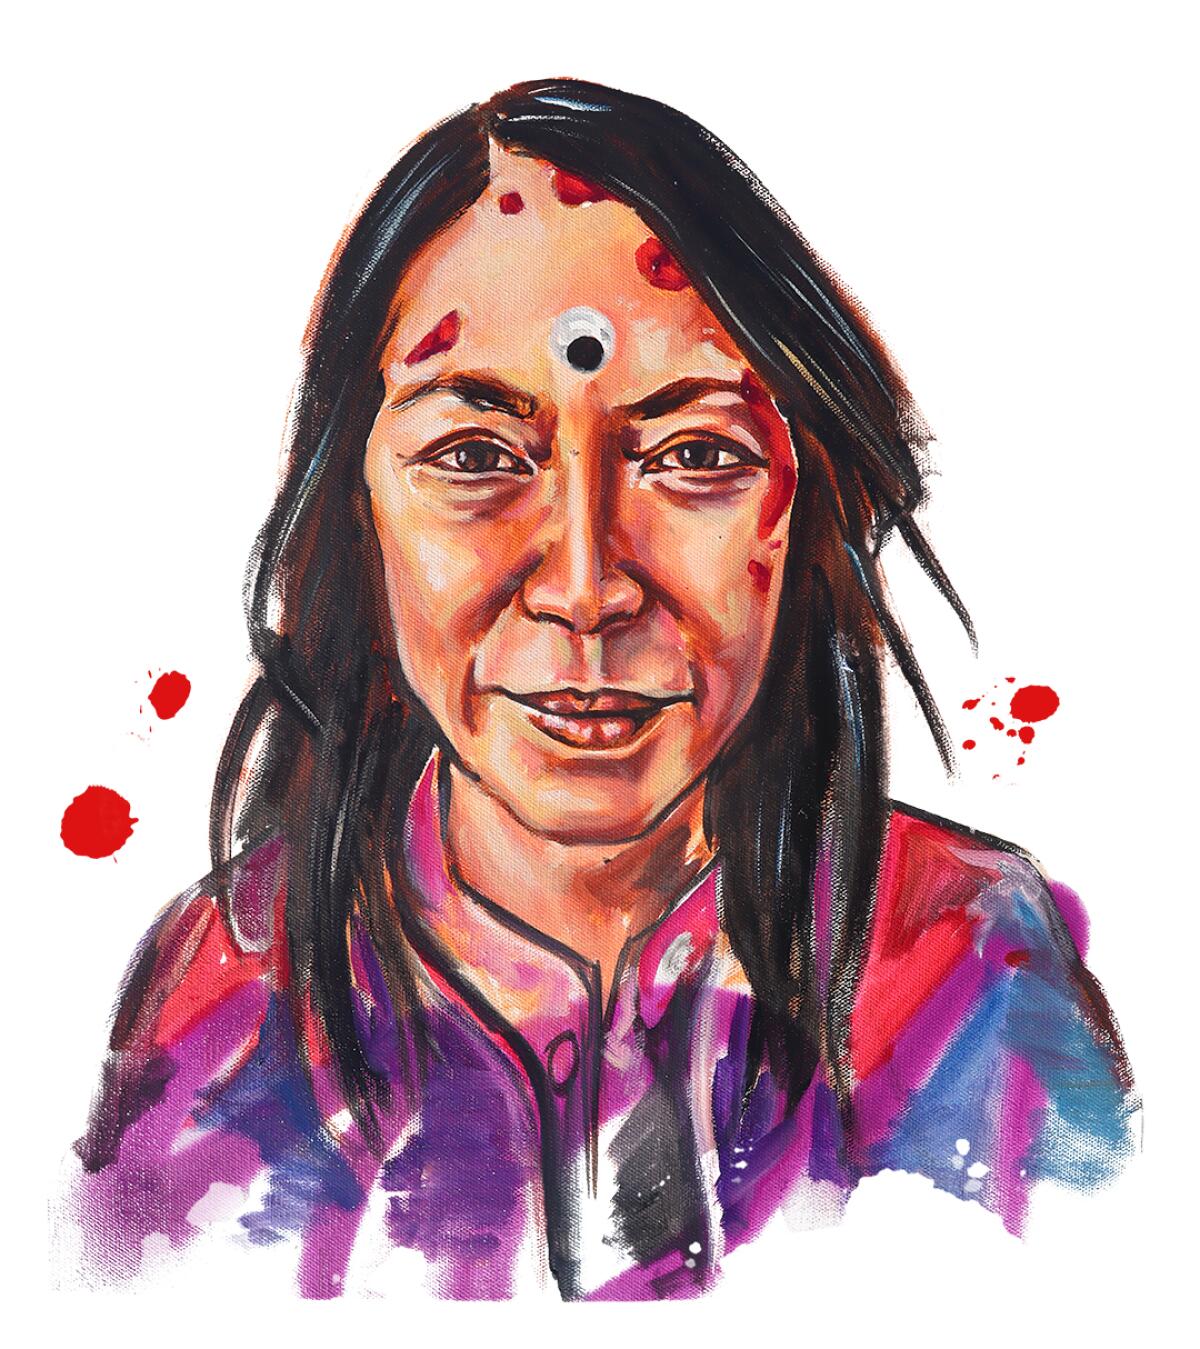 Illustration of Michelle Yeoh as one of her "Everything Everywhere All at Once" characters.